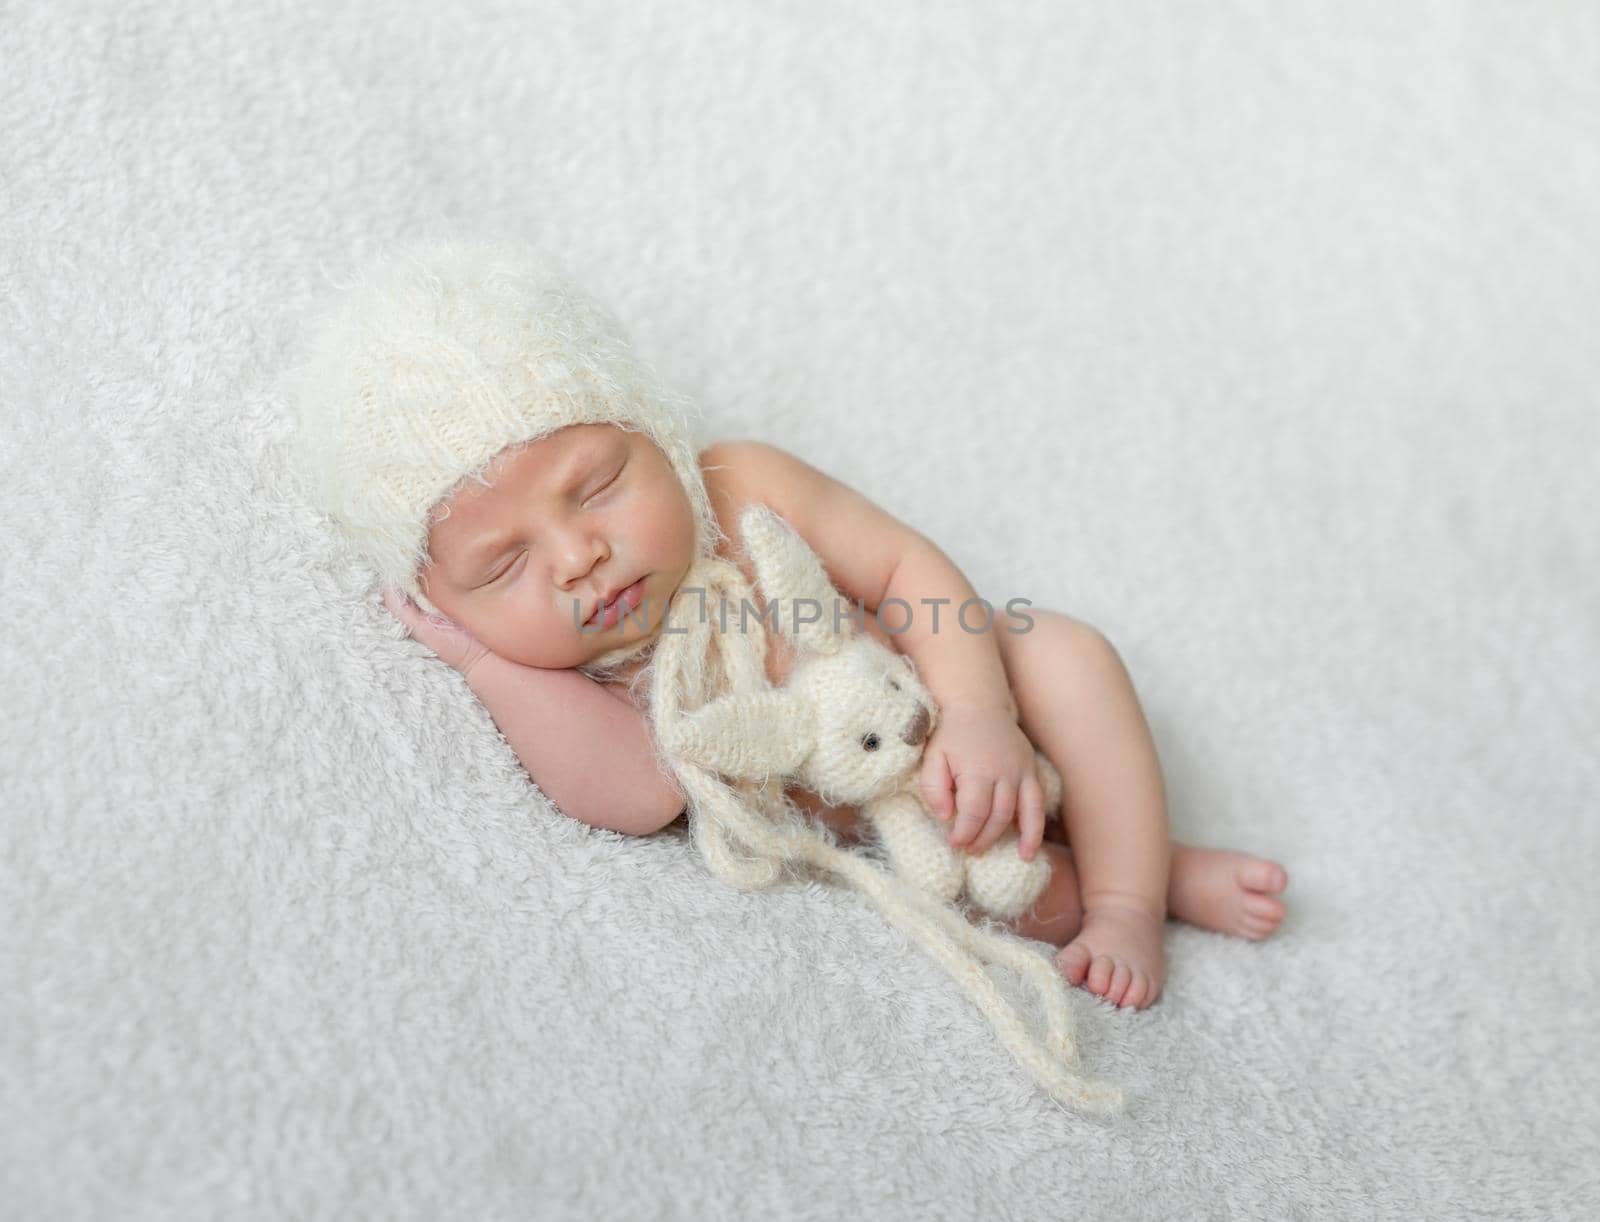 bare sleeping baby in hat with toy on white blanket by tan4ikk1